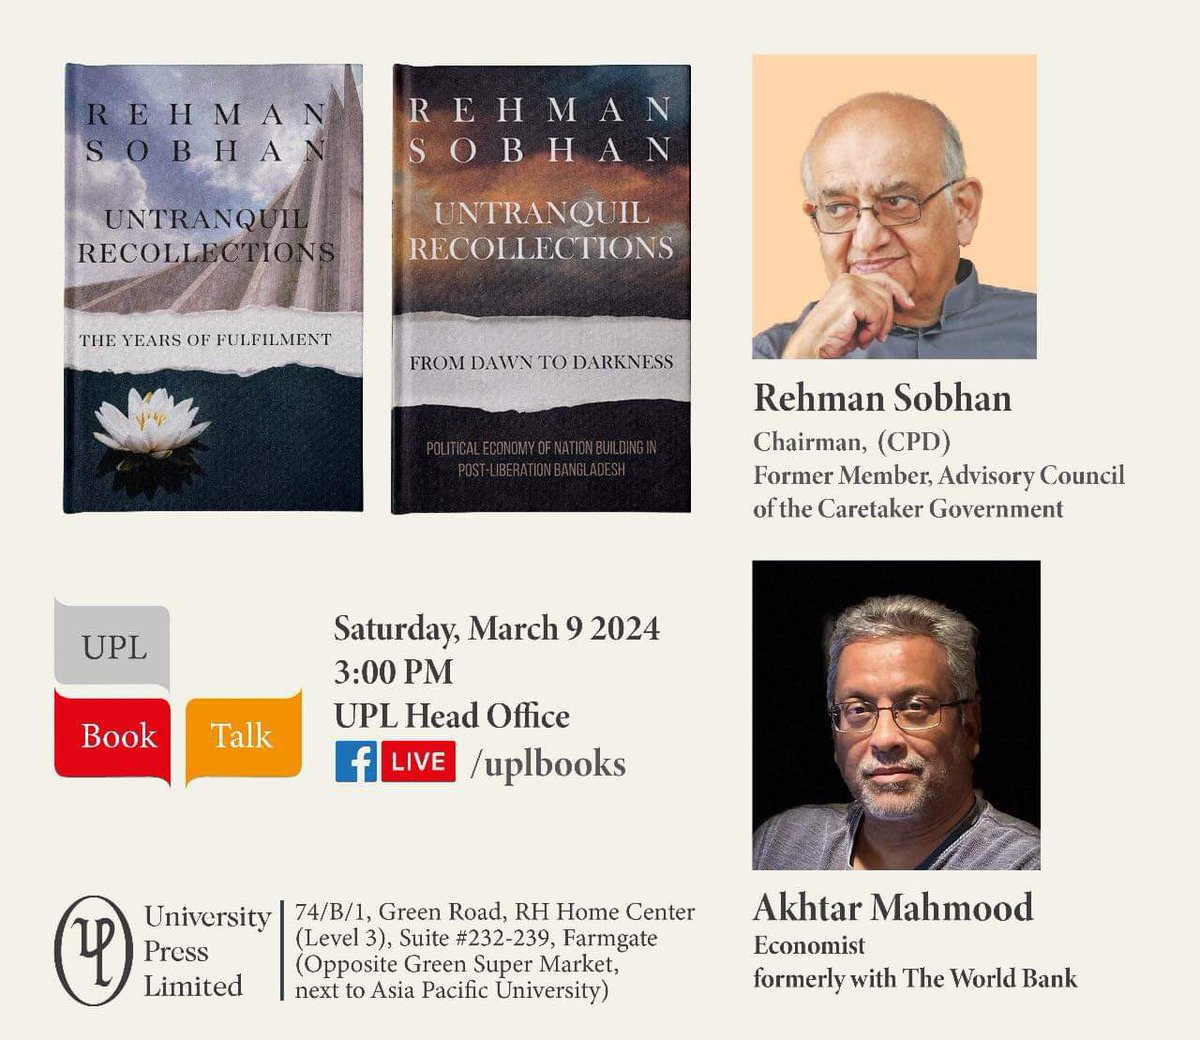 A candid conversation with Professor Rehman Sobhan The University Press Limited has recently published the Bangladeshi edition of the two volumes of Professor Rehman Sobhan's autobiography Untranquil Recollections.  A launch ceremony was held in Dhaka on March 9 which featured a